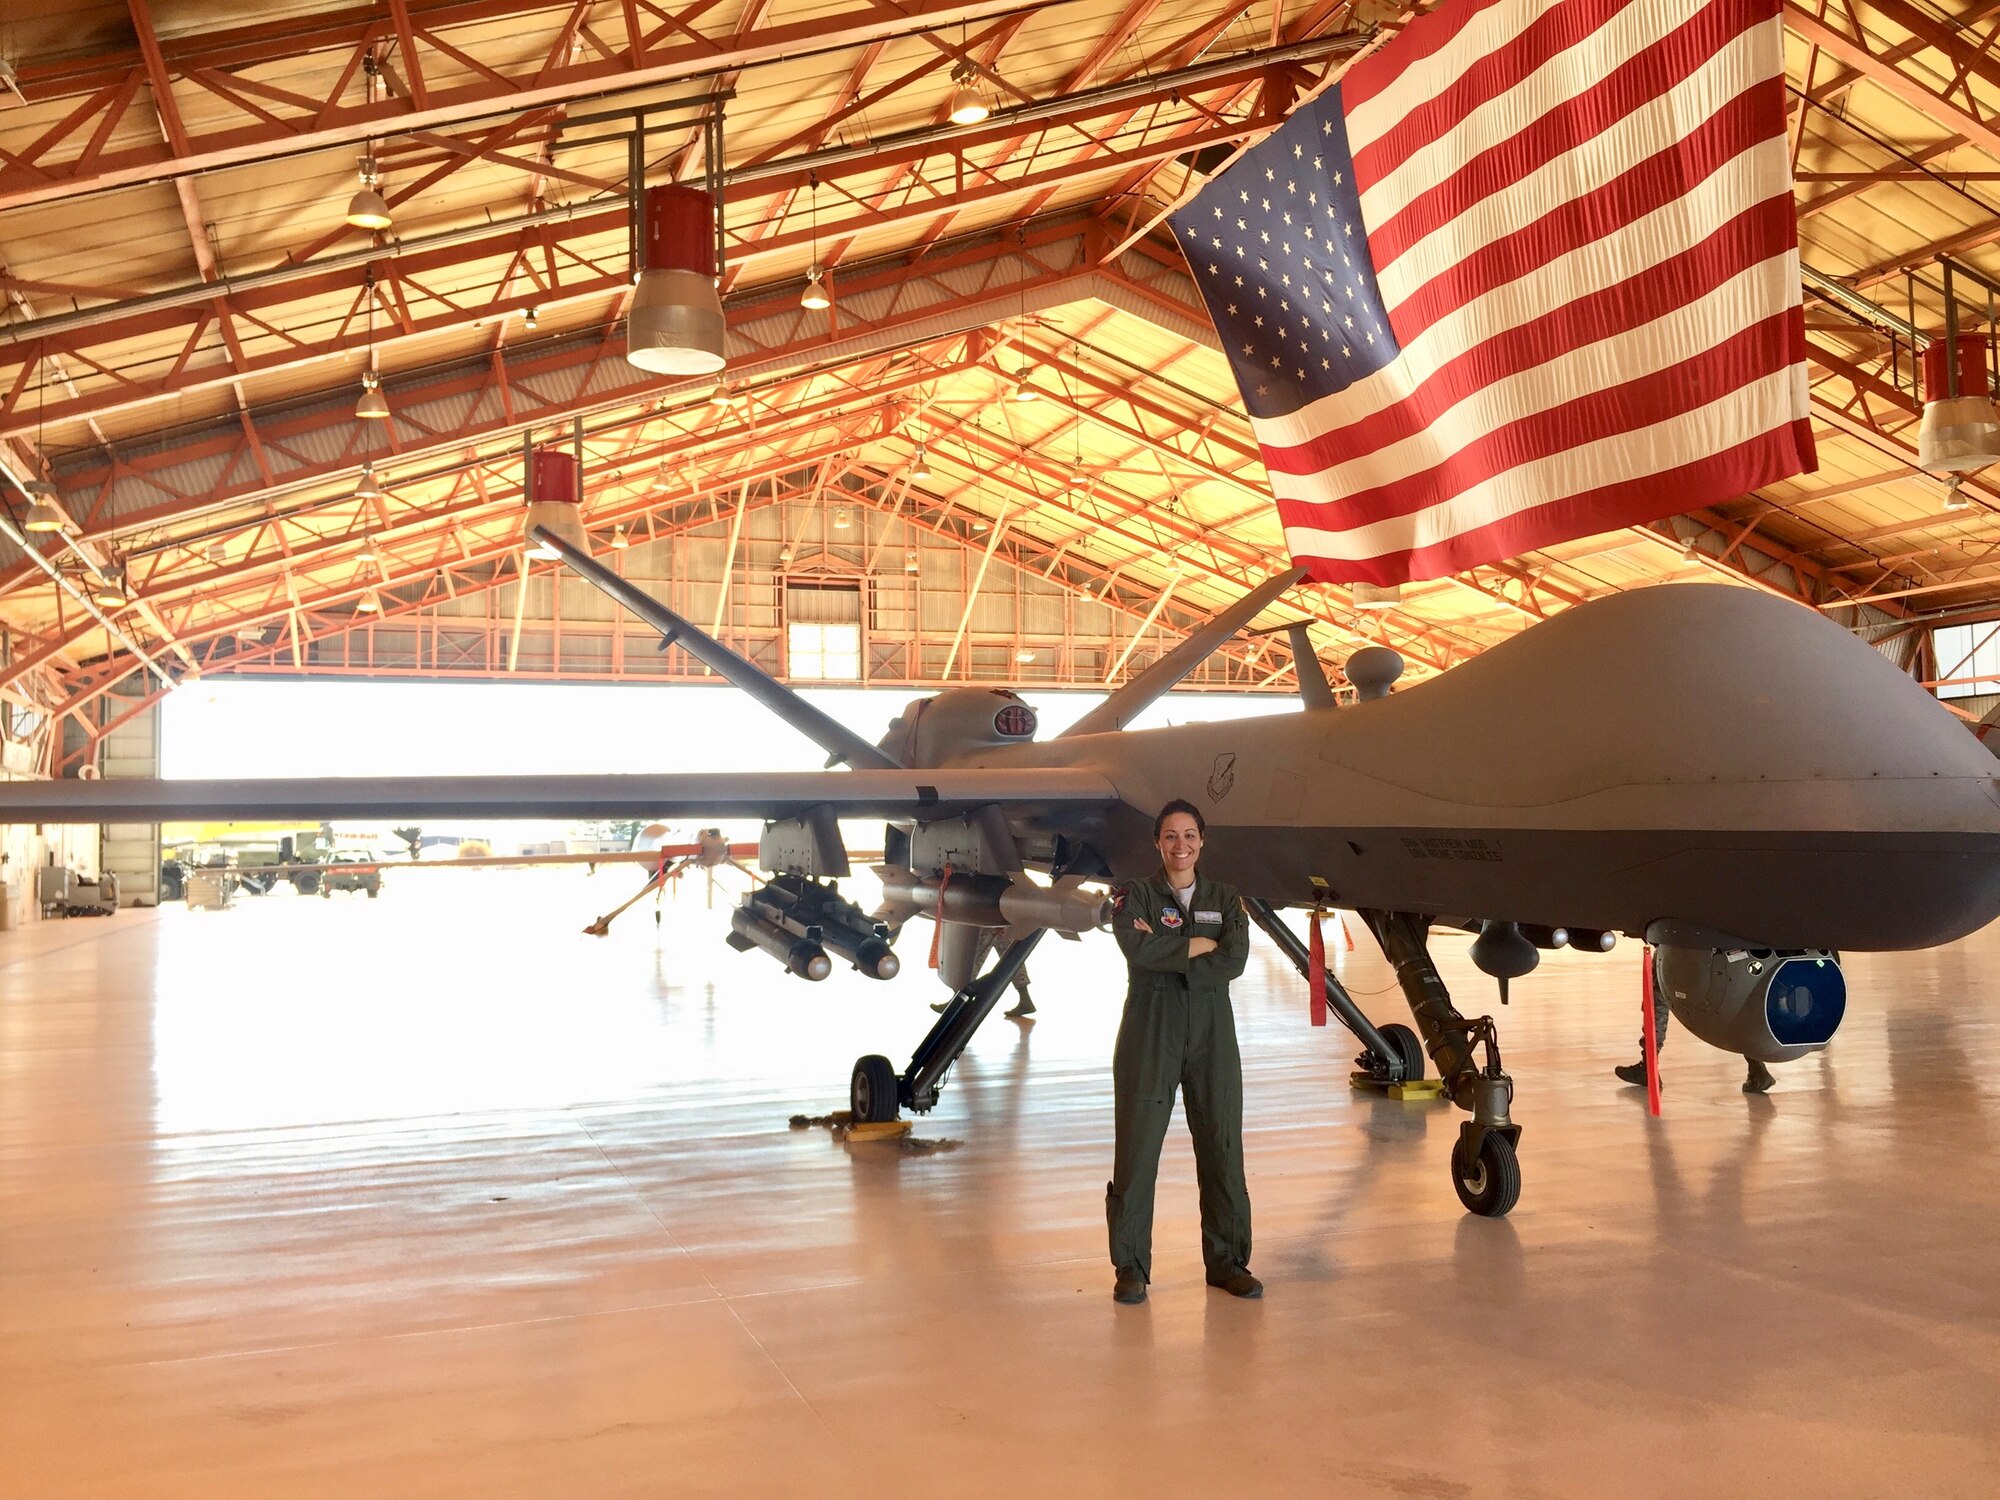 Capt. Cristina Kellenbence, a 2010 Academy graduate, poses next to an Air Force Remotely Piloted Aircraft that she pilots. (Courtesy photo)